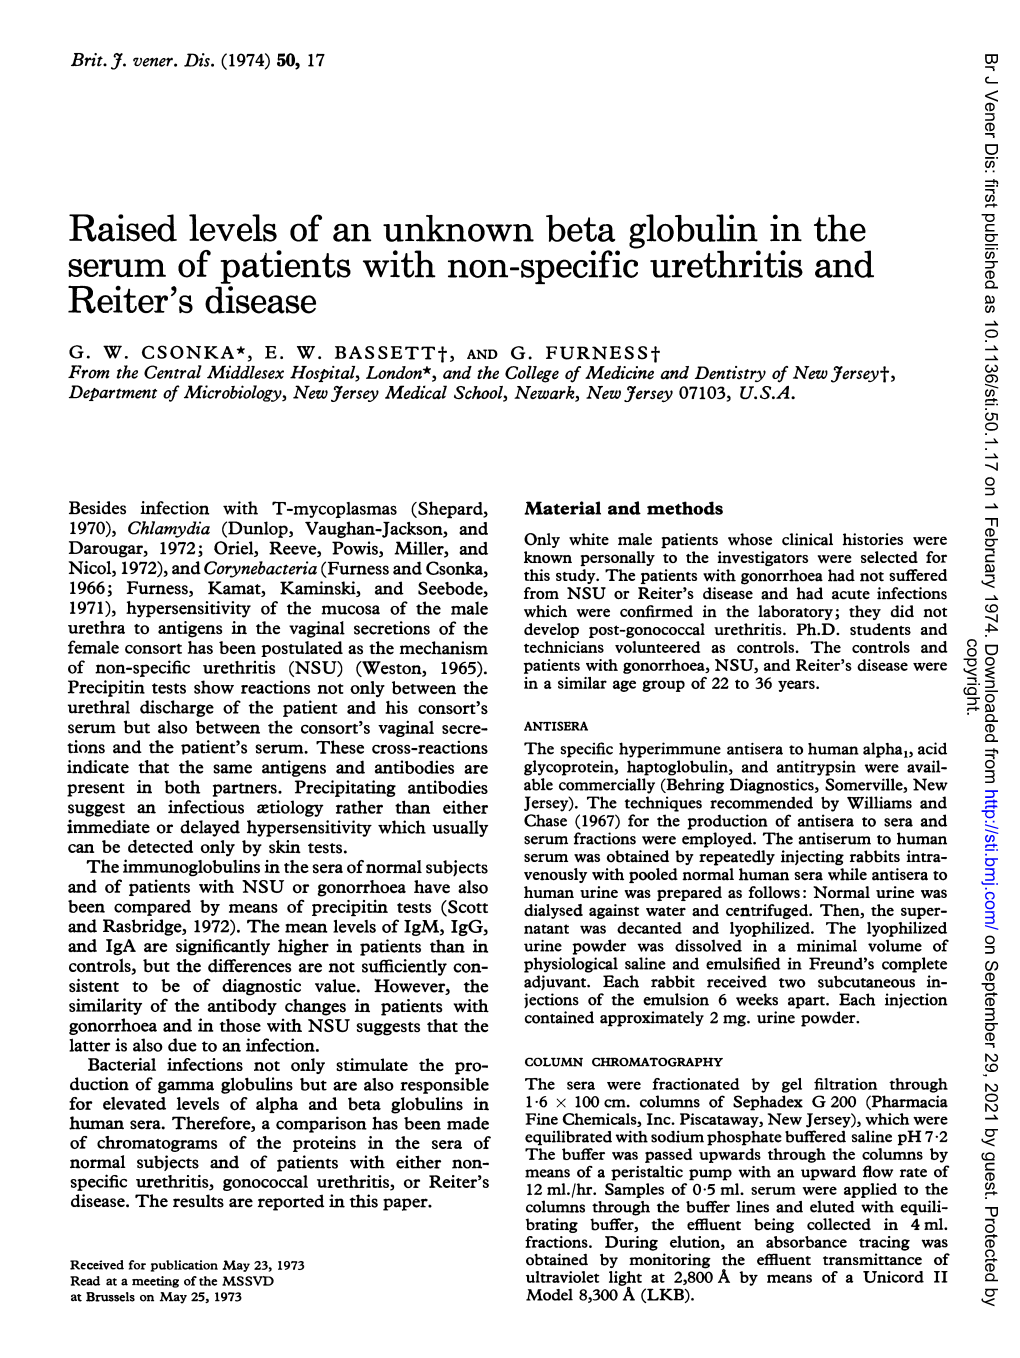 Raised Levels of an Unknown Beta Globulin in the Serum of Patients with Non-Specific Urethritis and Reiter's Disease